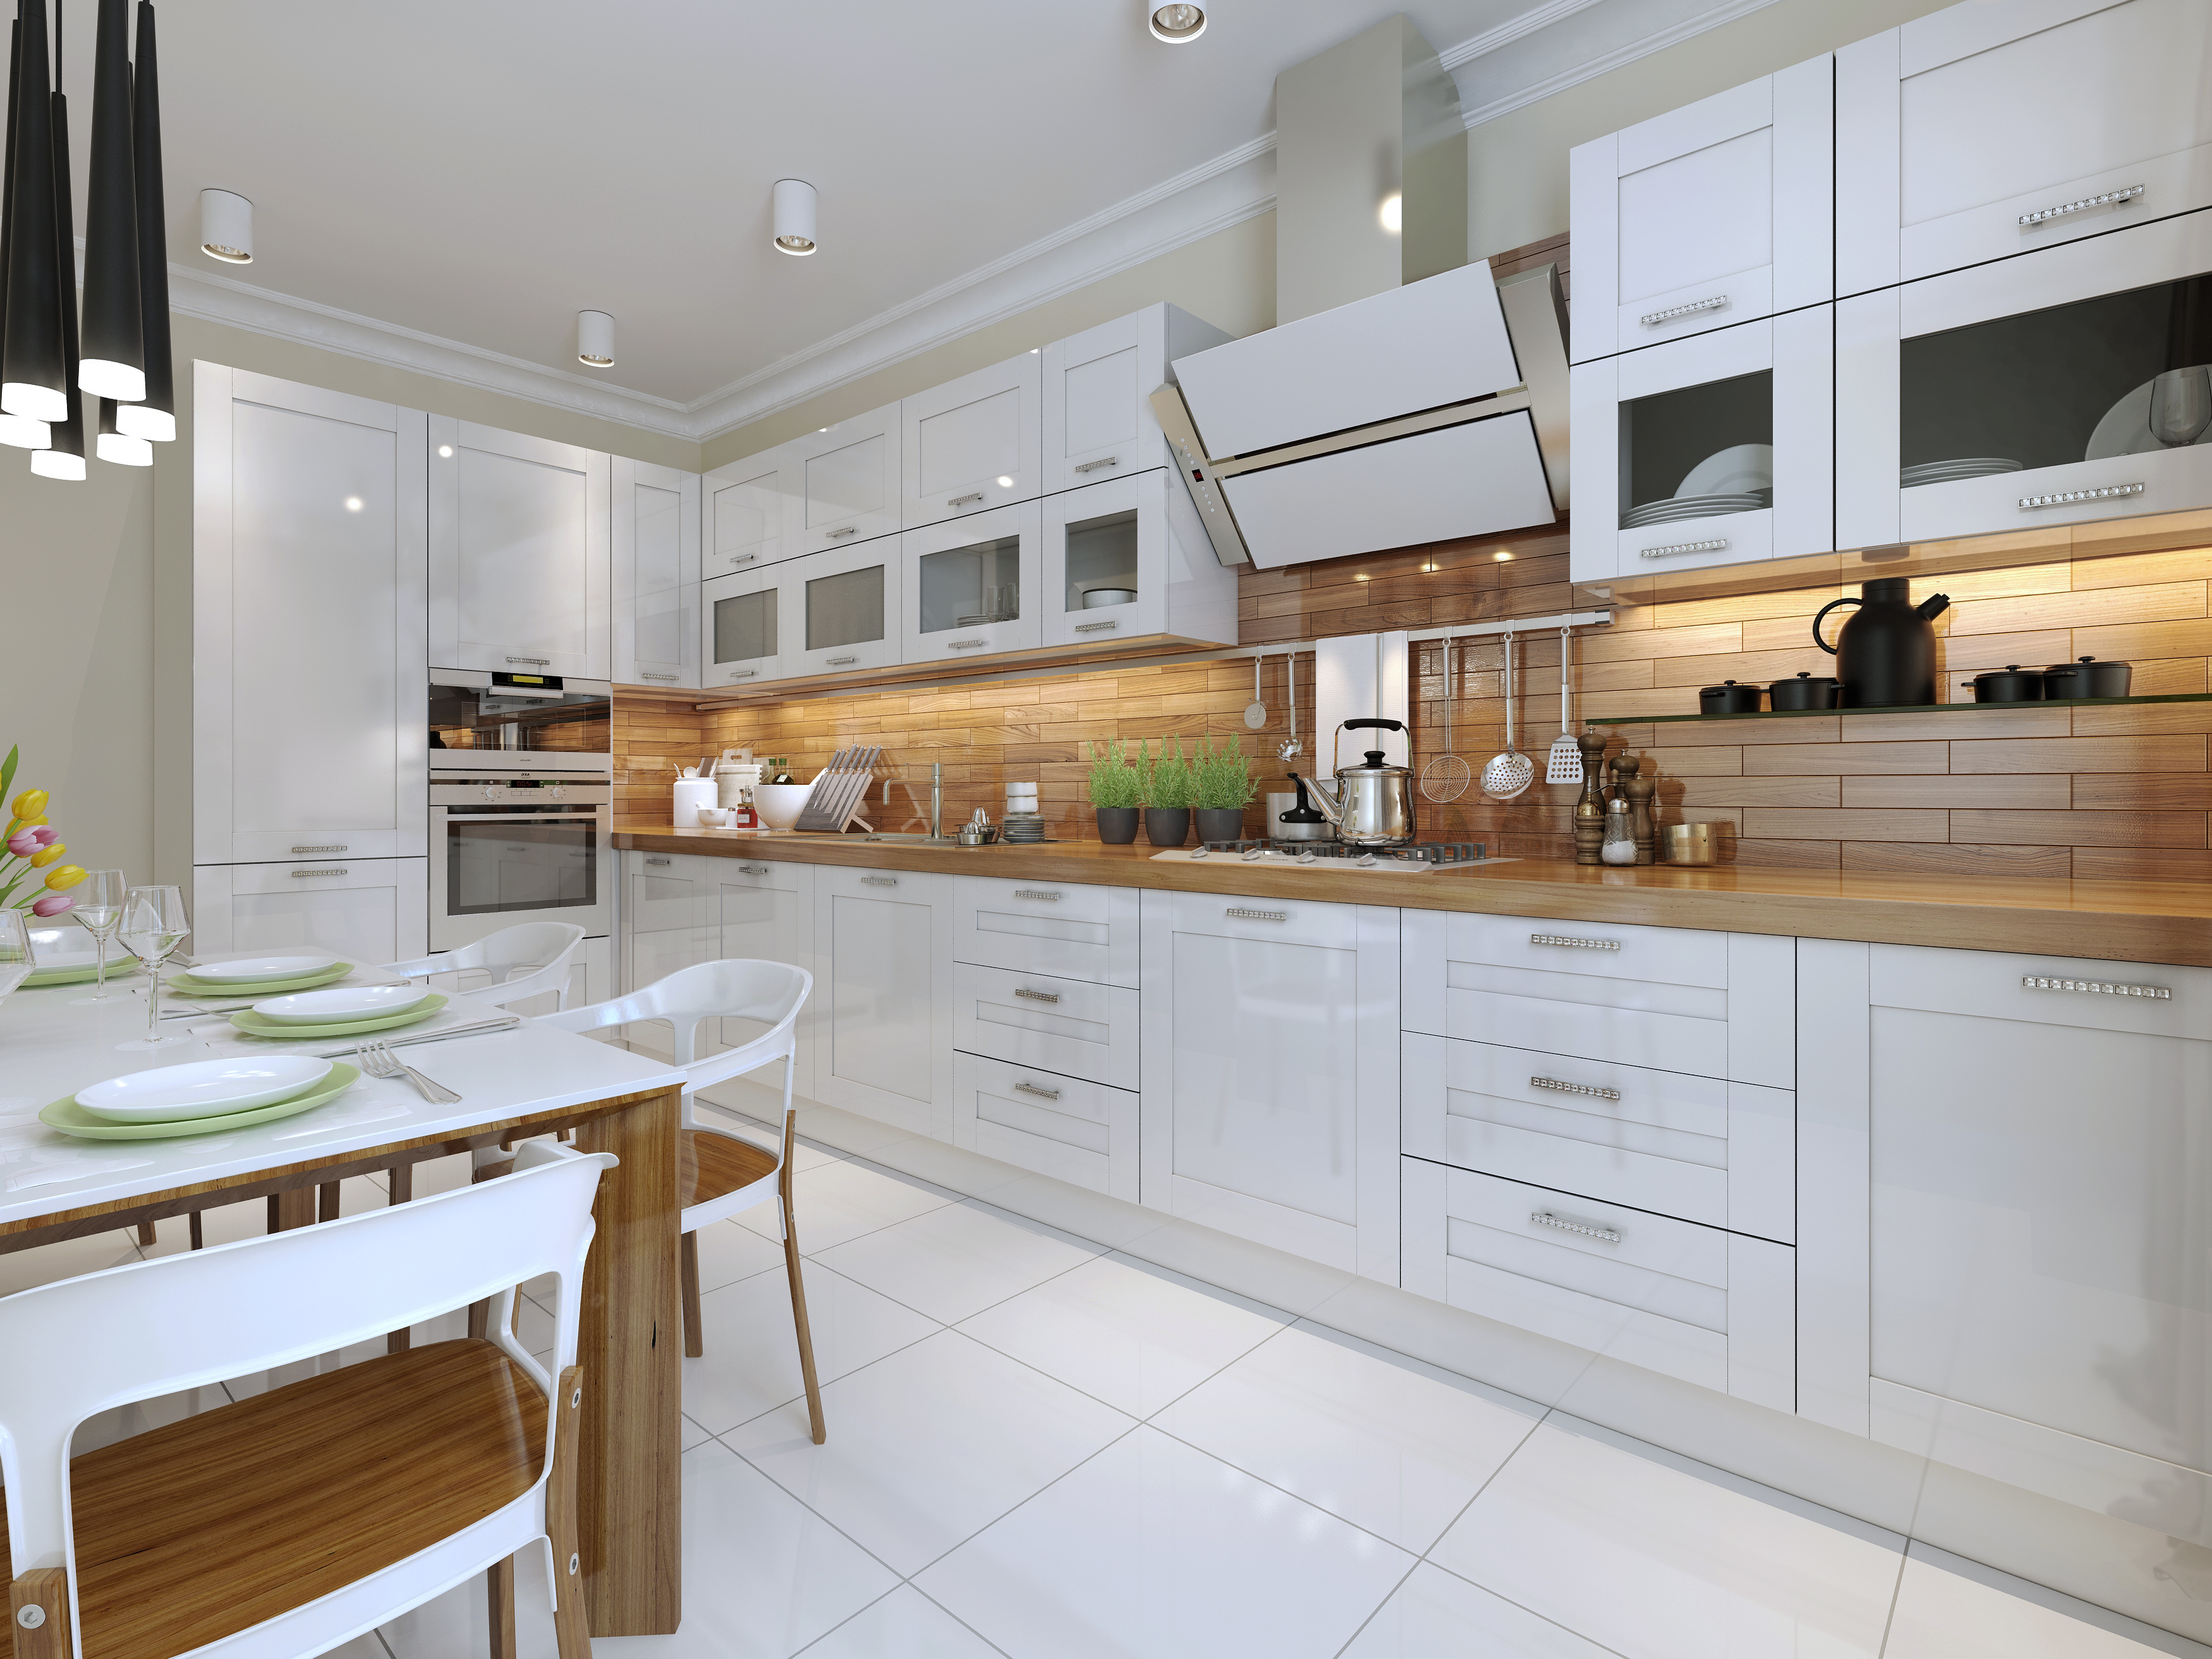 Kitchen country house caramel surrey sussex hampshire violet ...